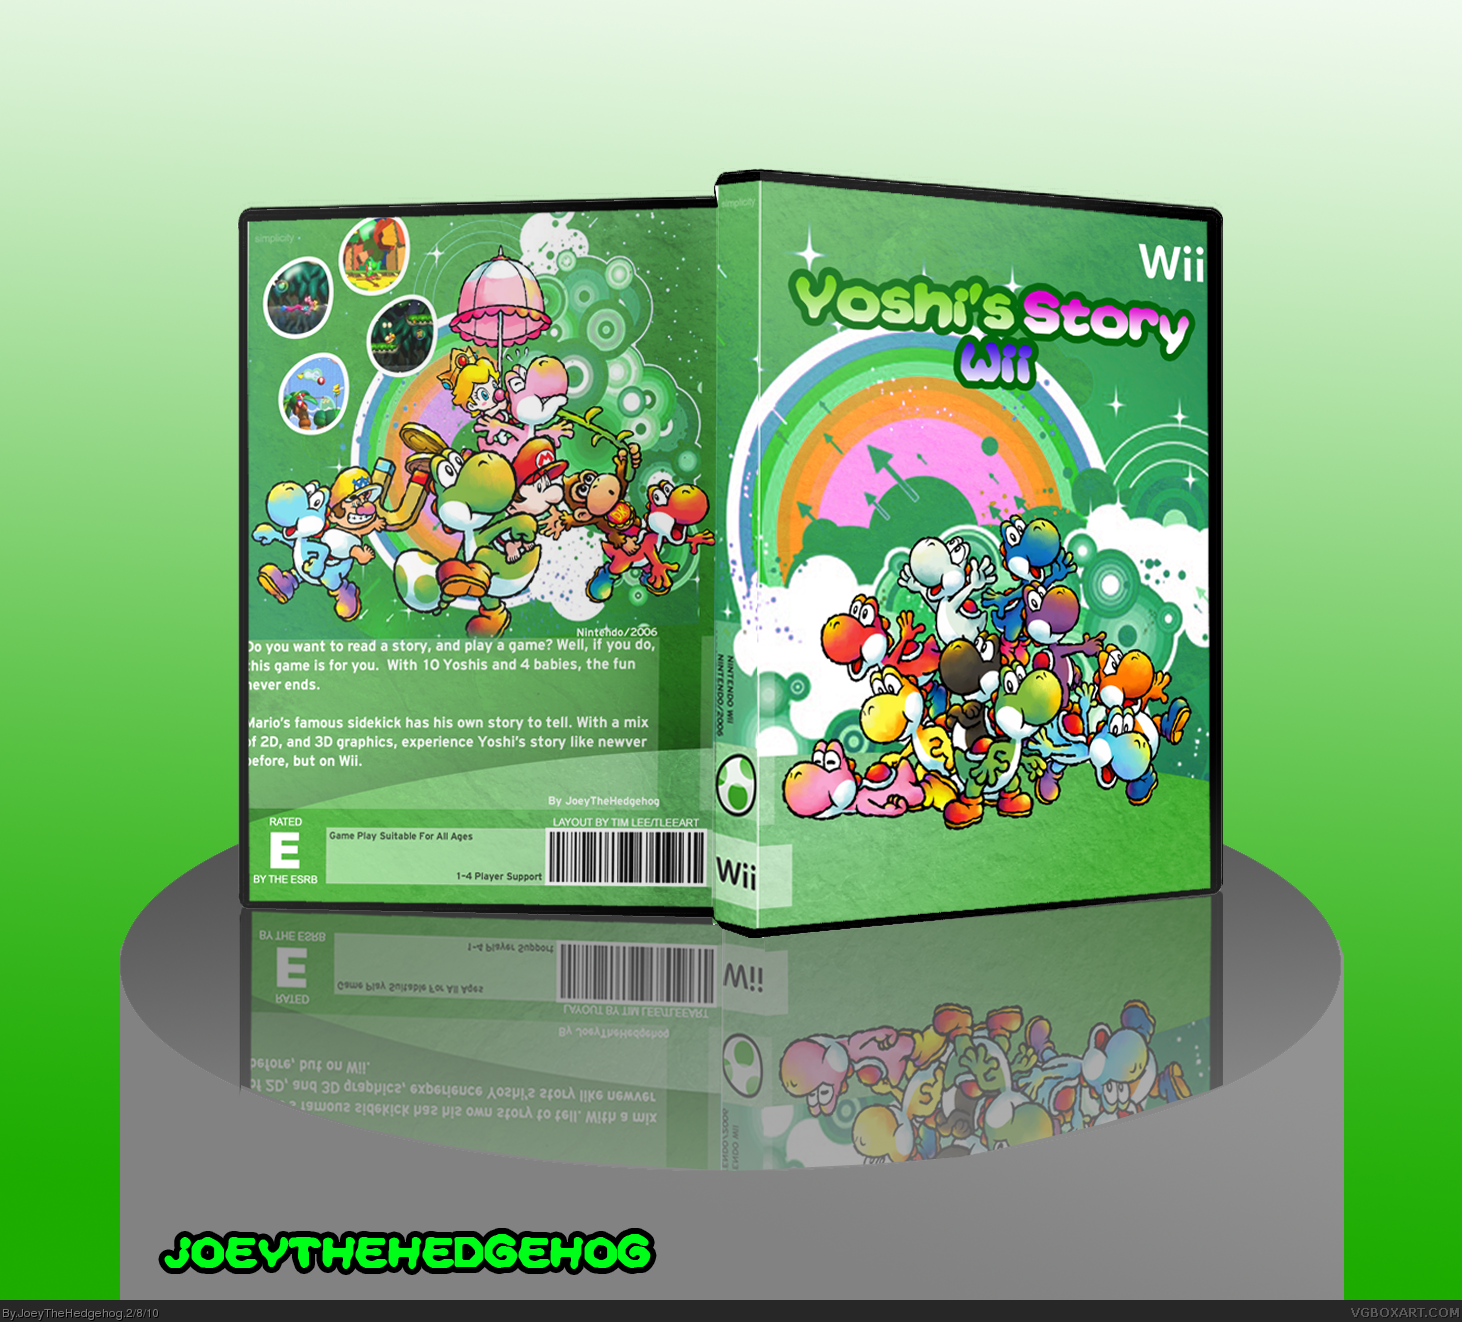 Yoshi's Story Wii box cover